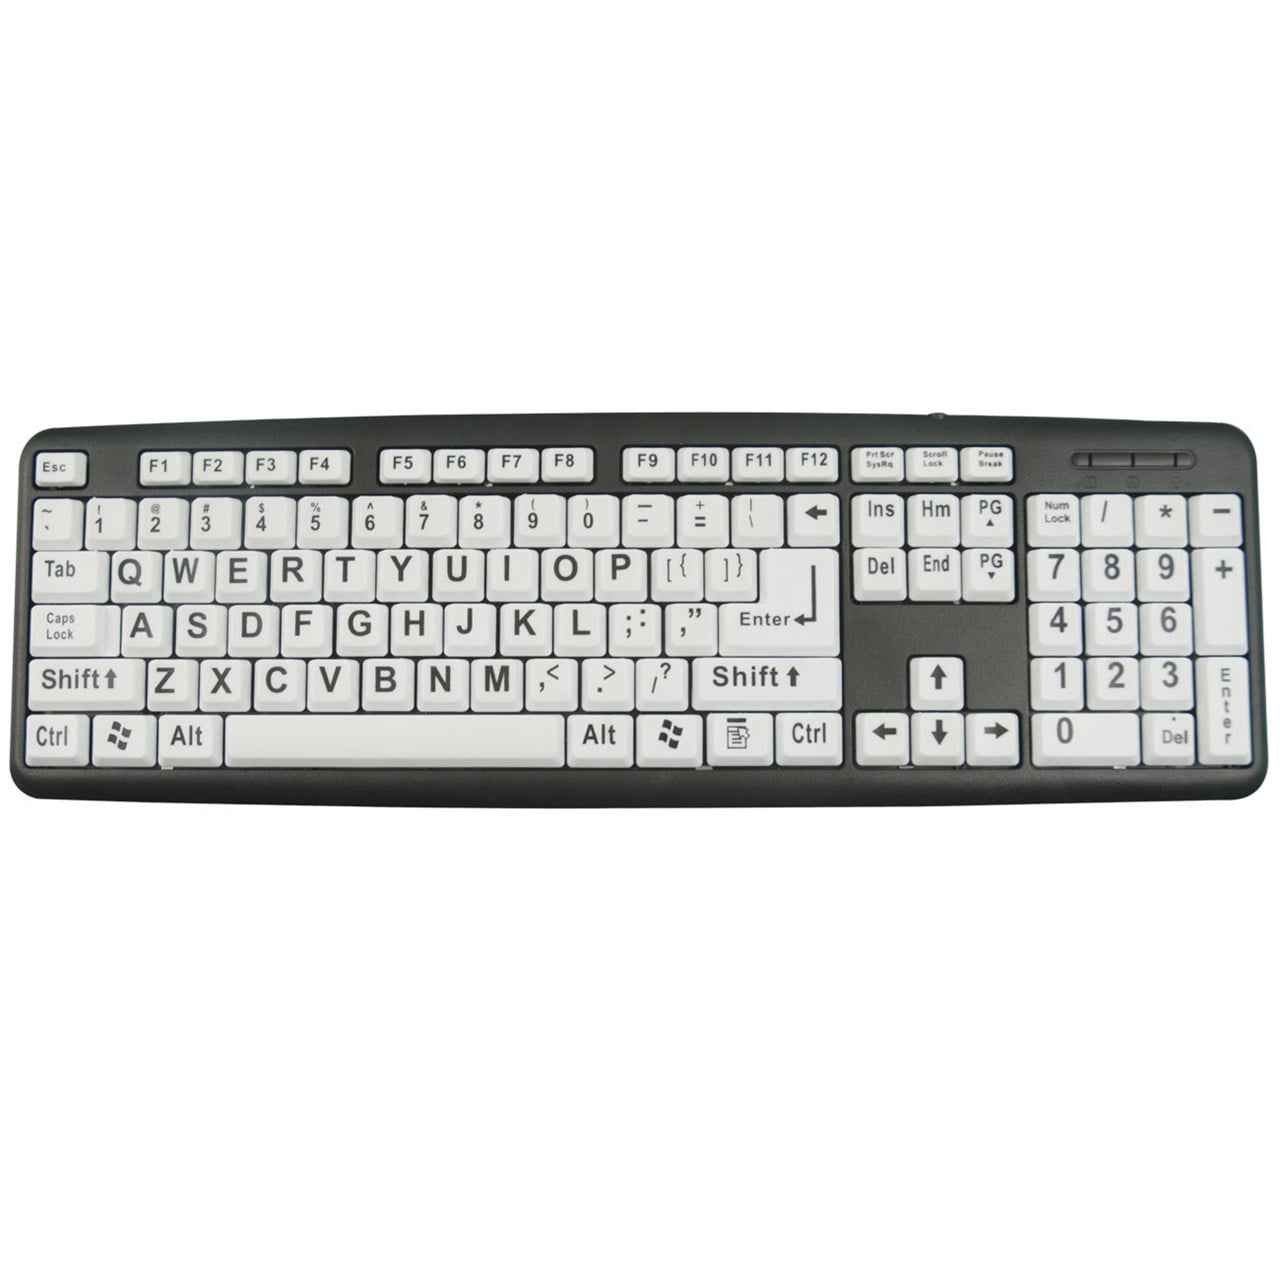 USB Wired PC Game Gaming Keyboard Large Print White Keys Black Letter for Old 